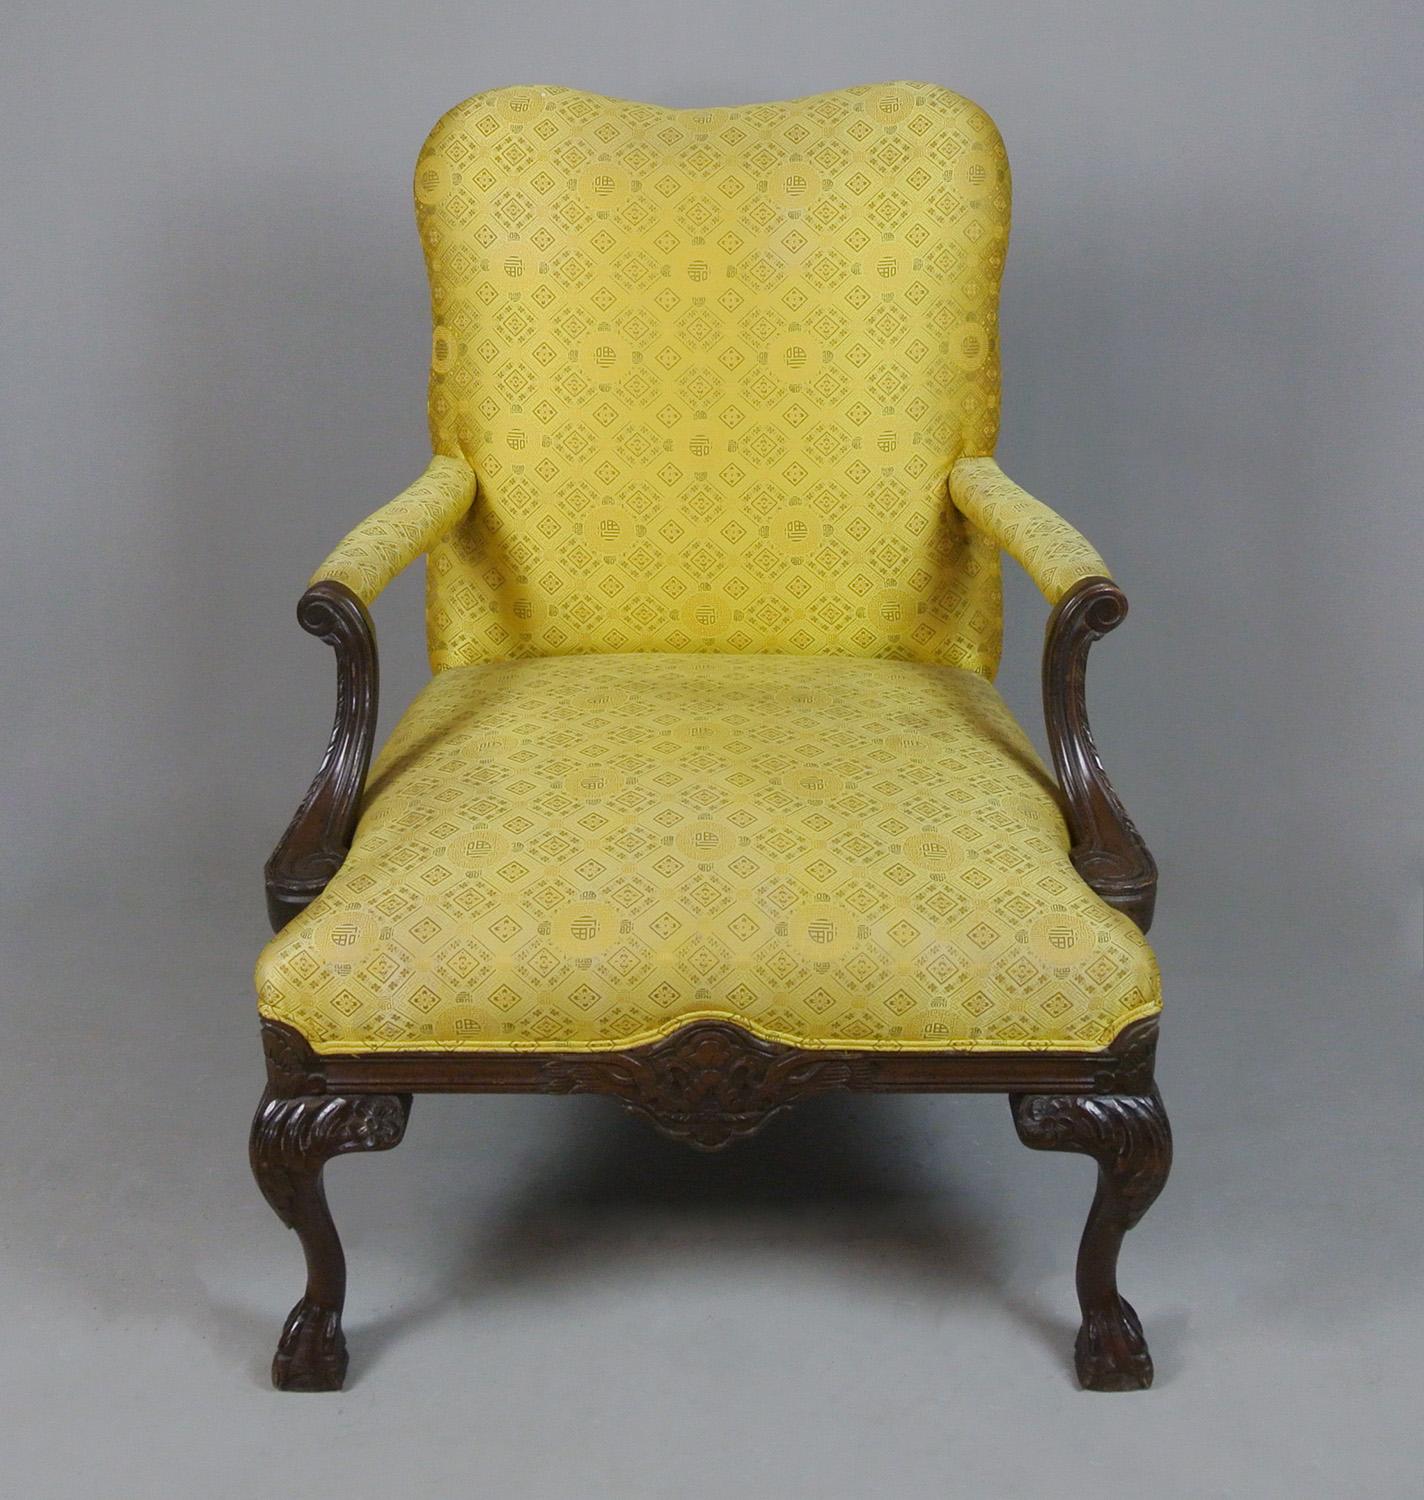 A very good quality pair of 19th century chairs with well carved cabriole legs to front and back, serpentine shaped backs and lovely scrolled and outswept arms on channel carved supports.

The chairs are upholstered in a gold Chinese pattern silk